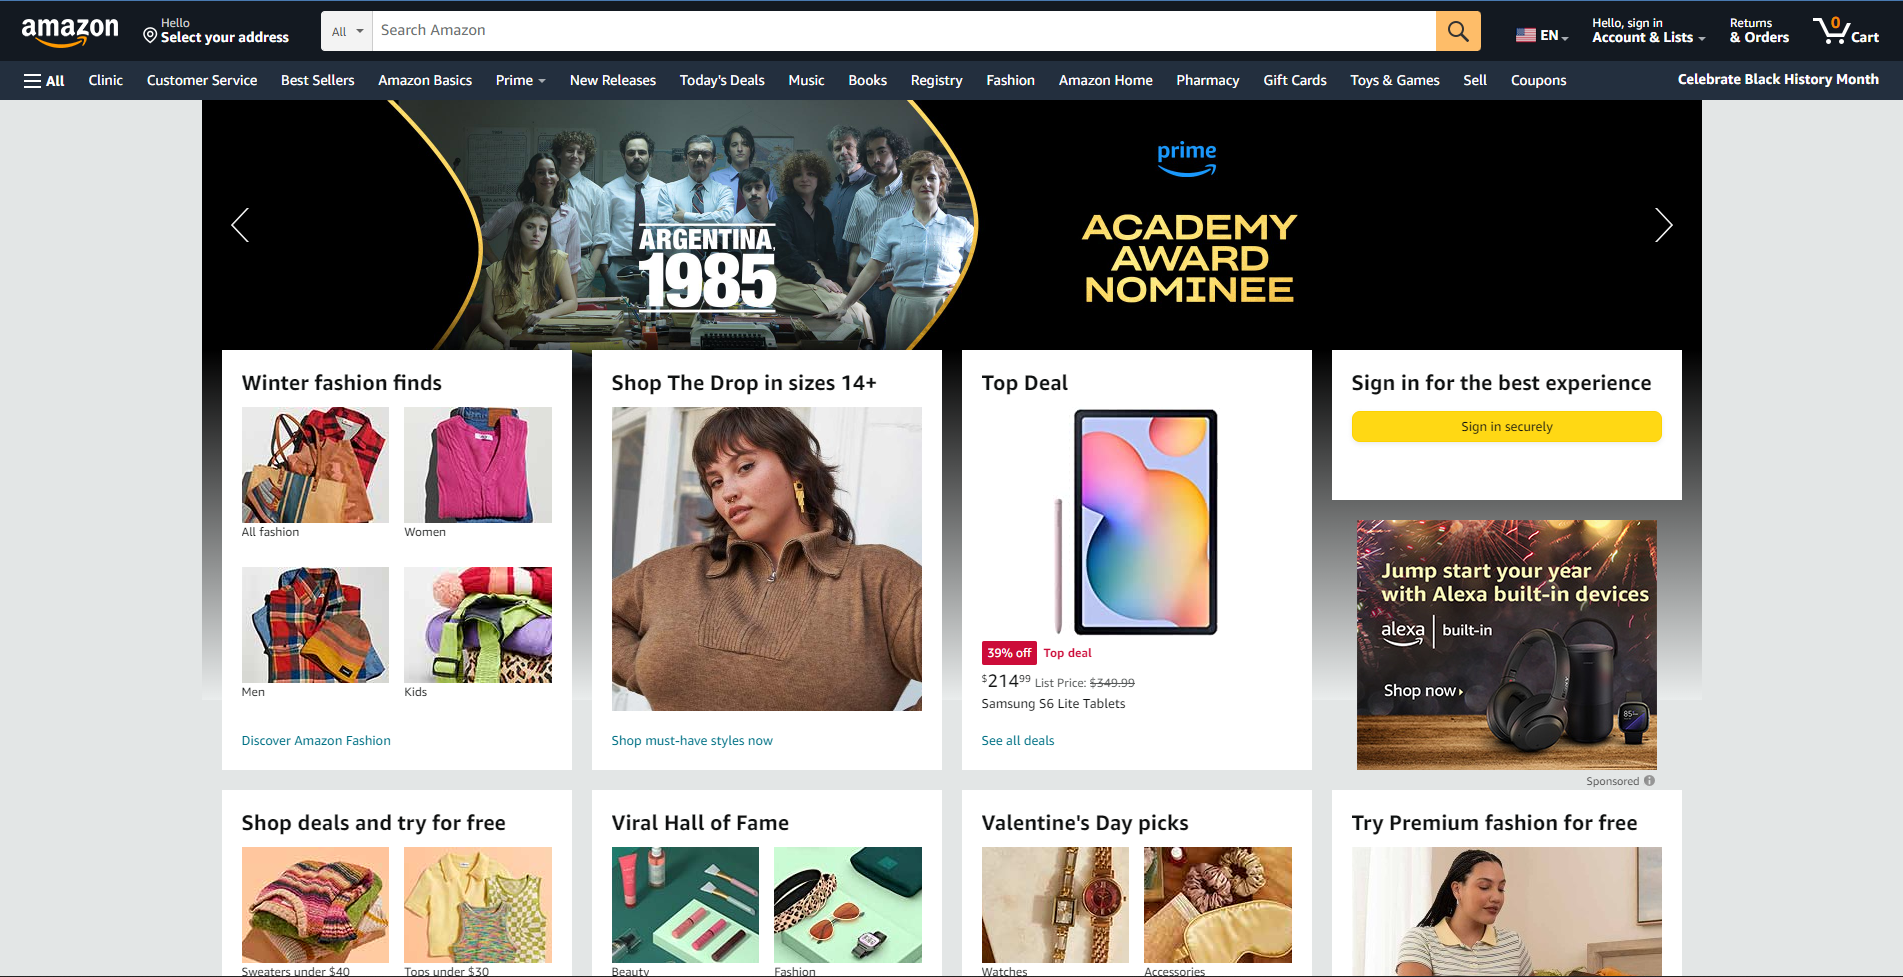 Screenshot of the home page of Amazon.com